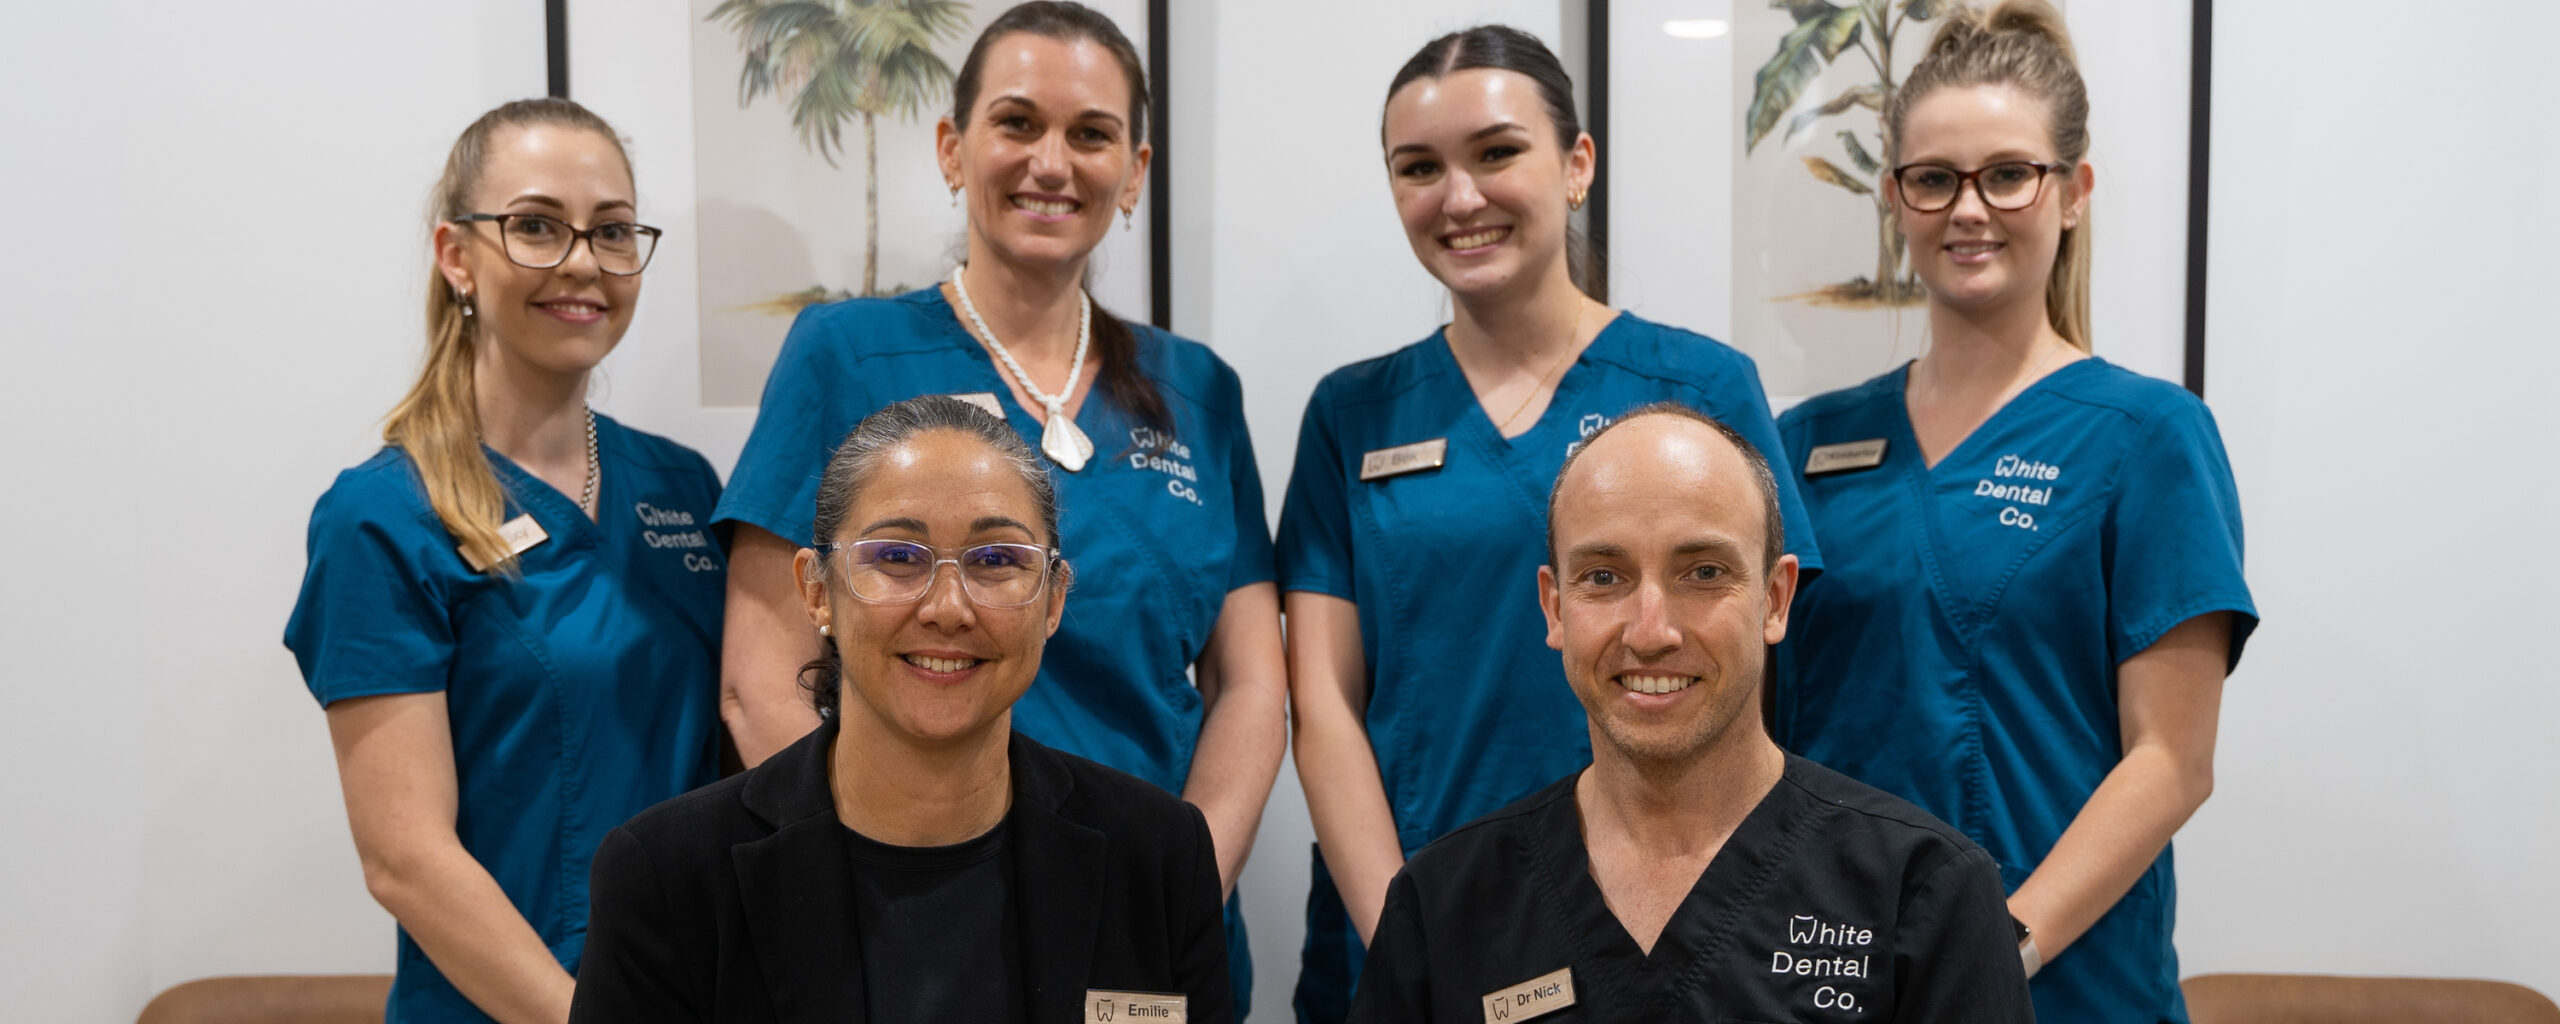 Practice manager Emilie White and principal dentist Dr Nick White, both dressed in black, sit in front of the rest of the clinical team, who are wearing mid-blue uniforms.